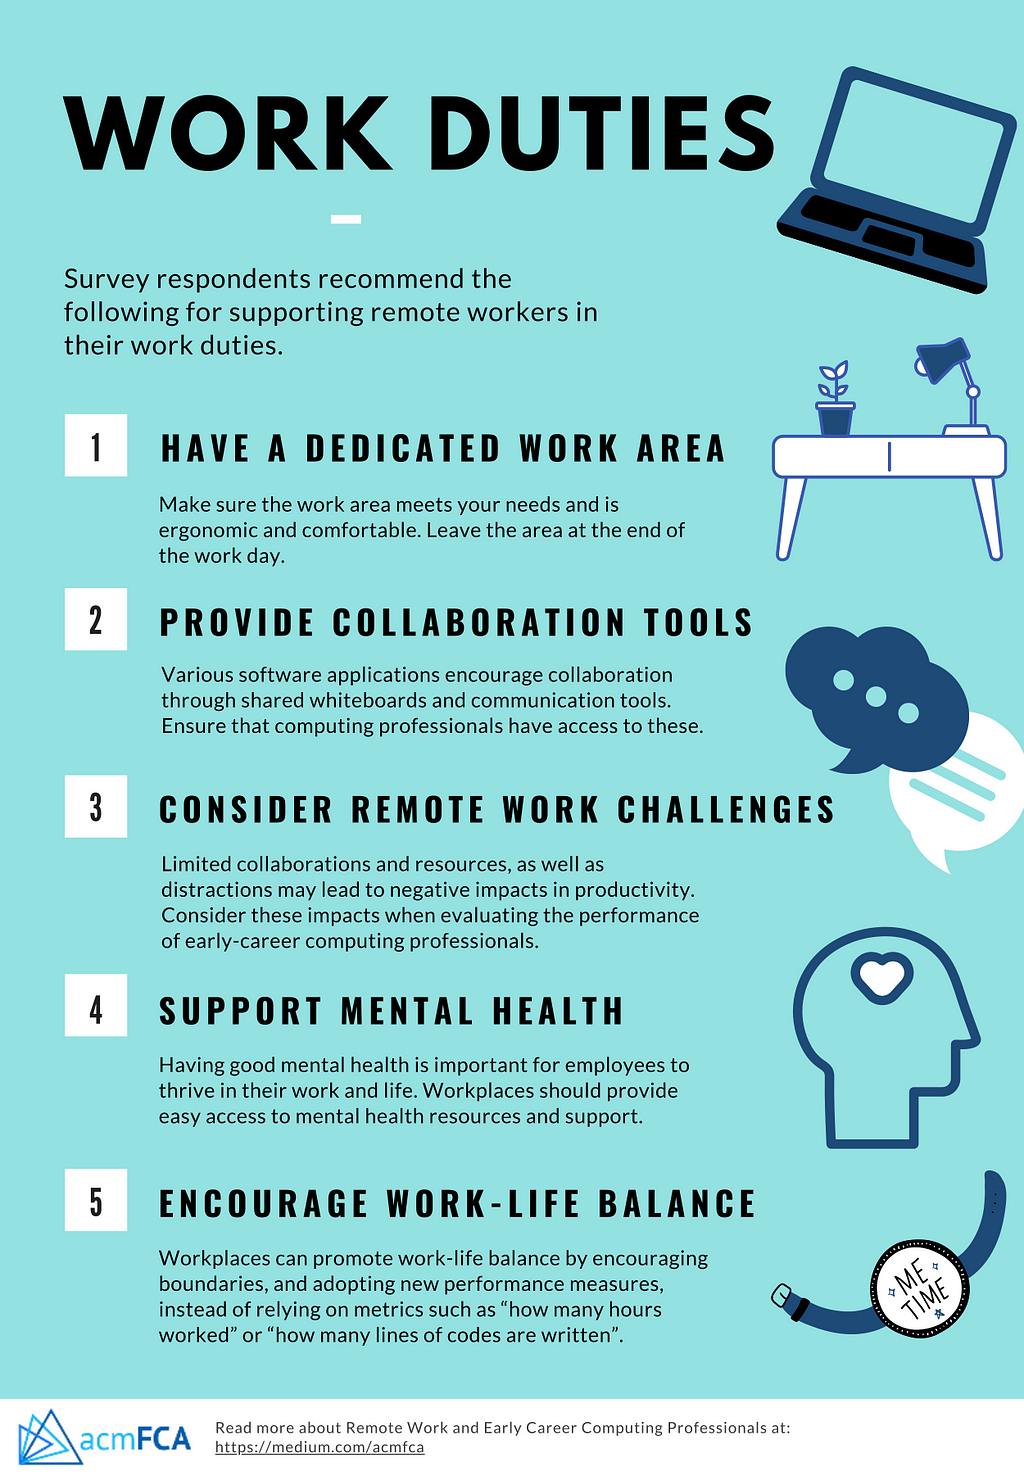 Have a dedicated work area, provide collaborative tools, support mental health and encourage work life balance.